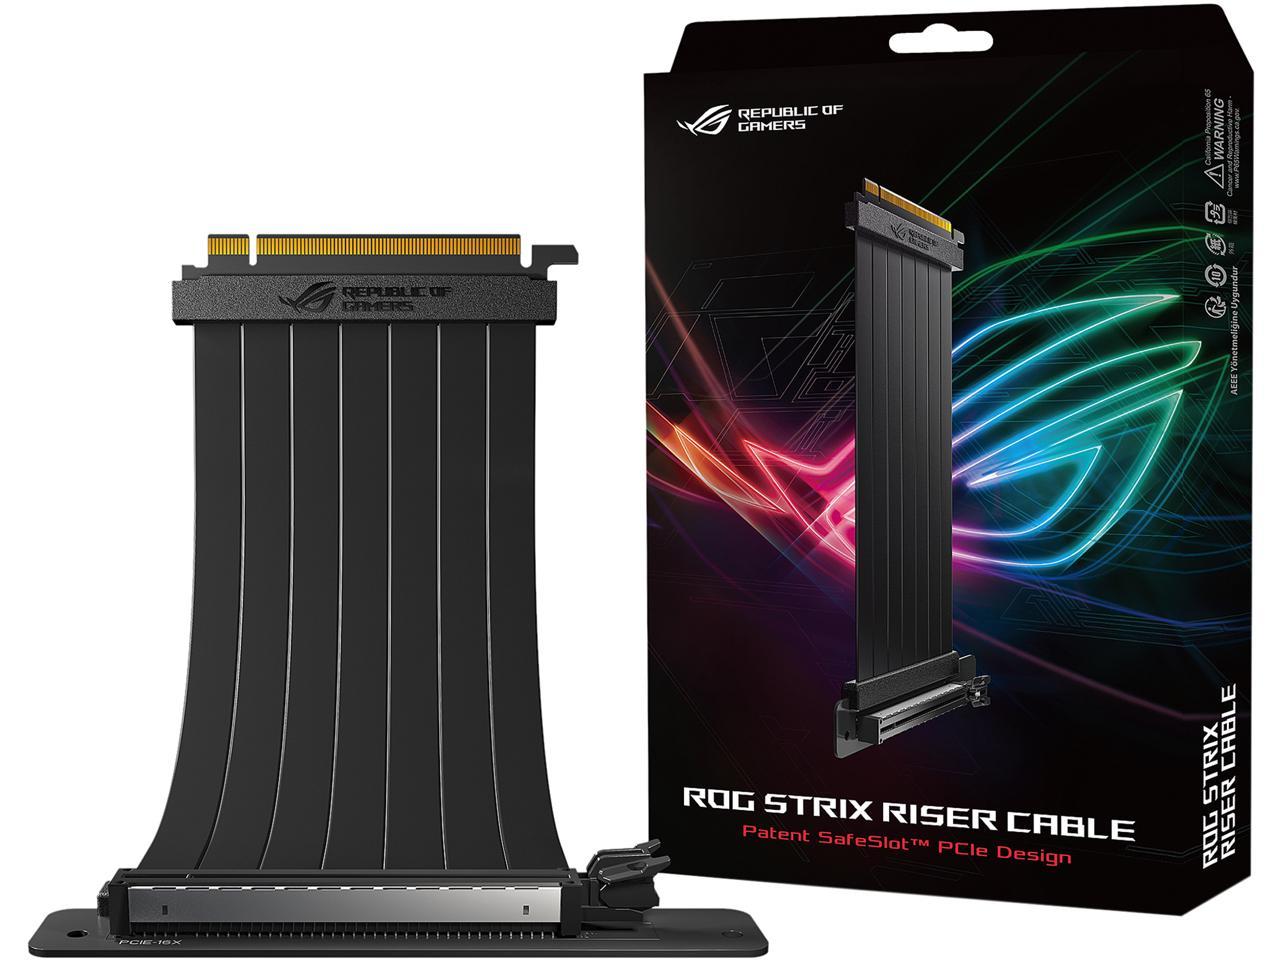 ASUS RS200 ROG Strix Riser Cable with 240 mm PCI-E x16 $11 + Free Shipping